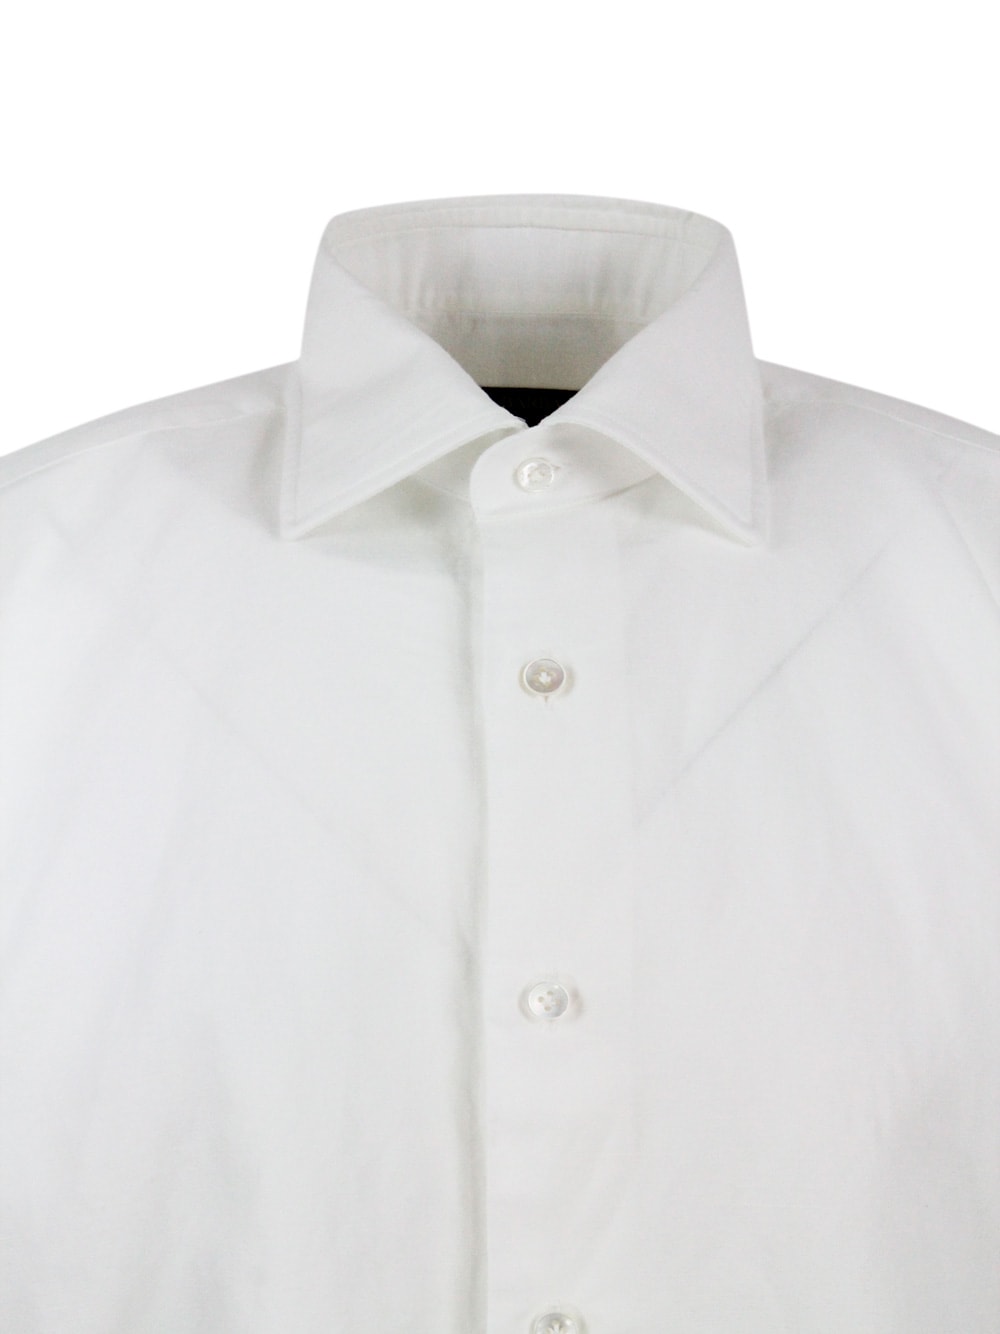 Shop Barba Napoli Cult Shirt In Fine Cotton And Linen With Italian Collar And Hand-sewn With Mother-of-pearl Buttons In White